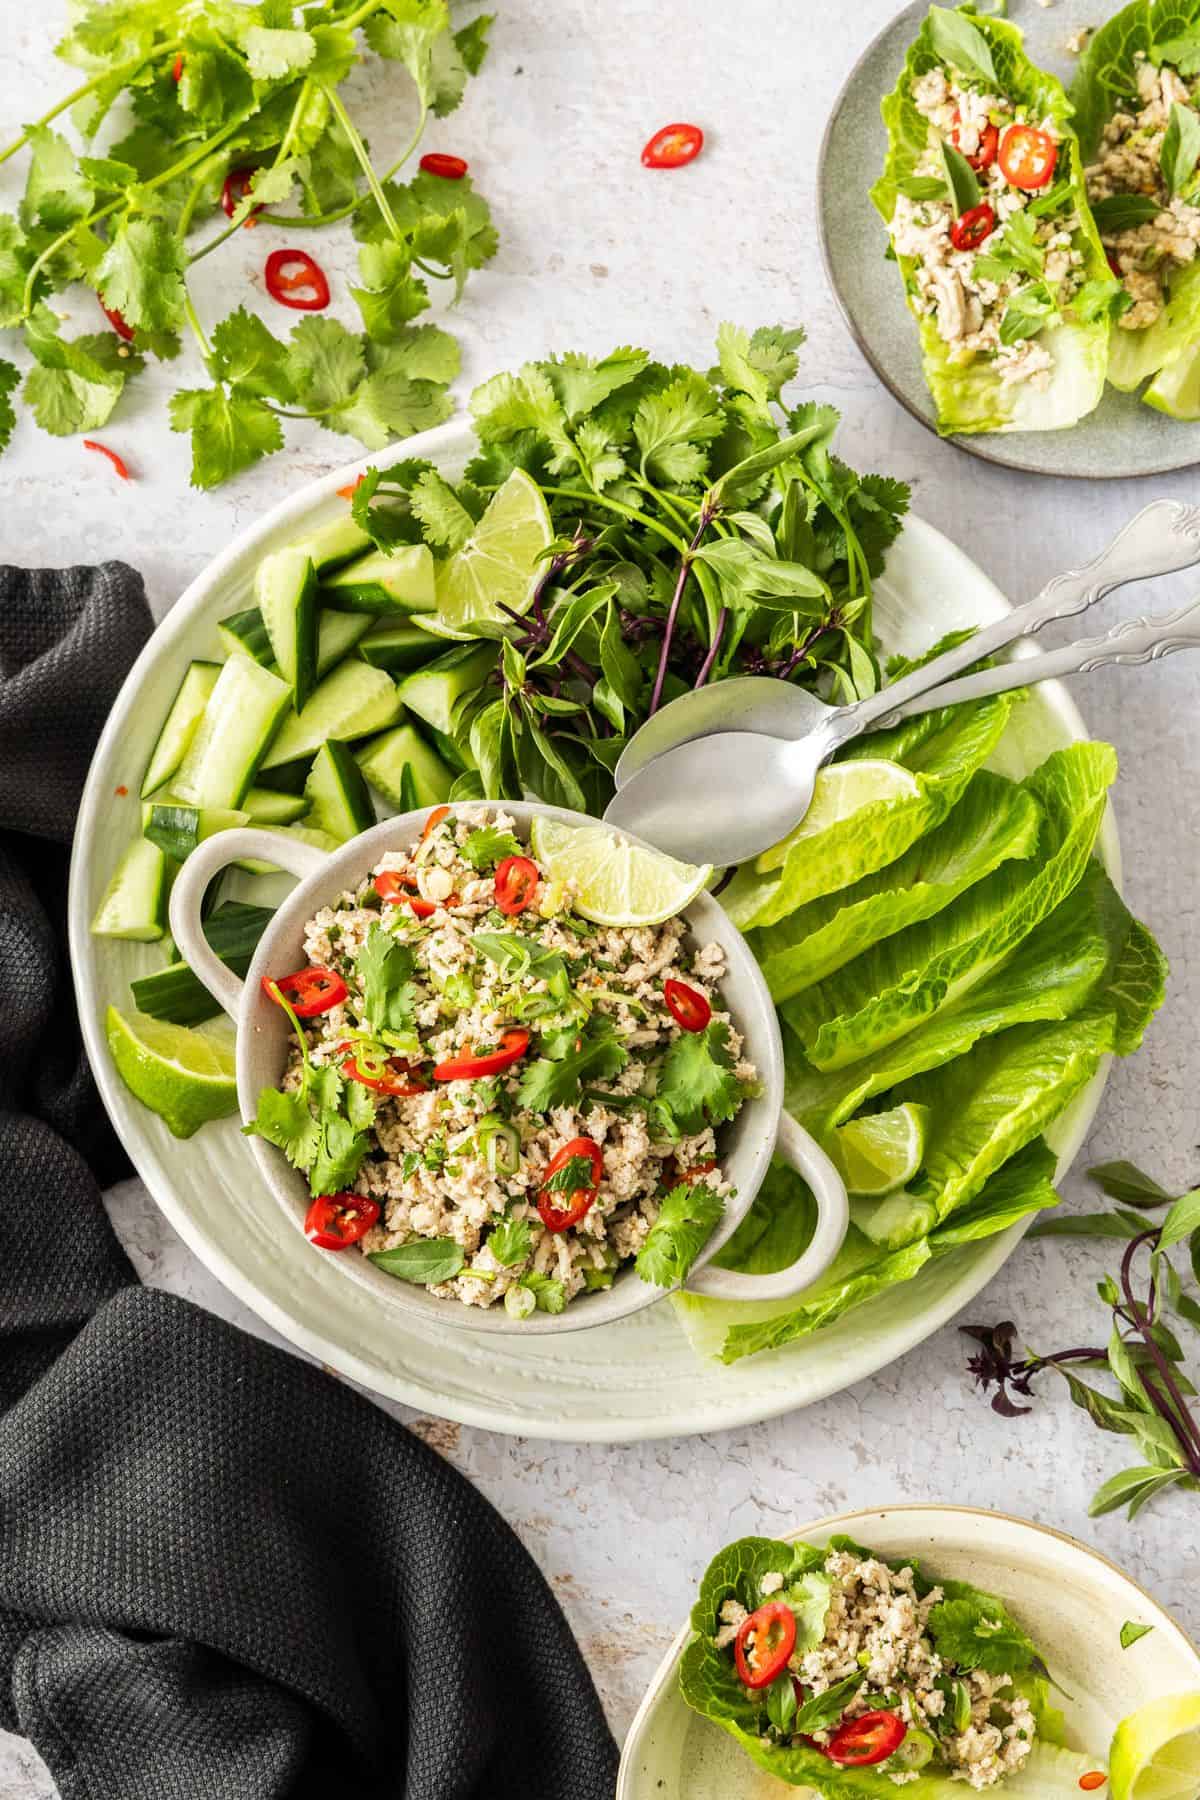 Bowl of Larb Gai, sitting on a round white plate with some lettuce, cucumber pieces, herbs and two silver spoons for serving.